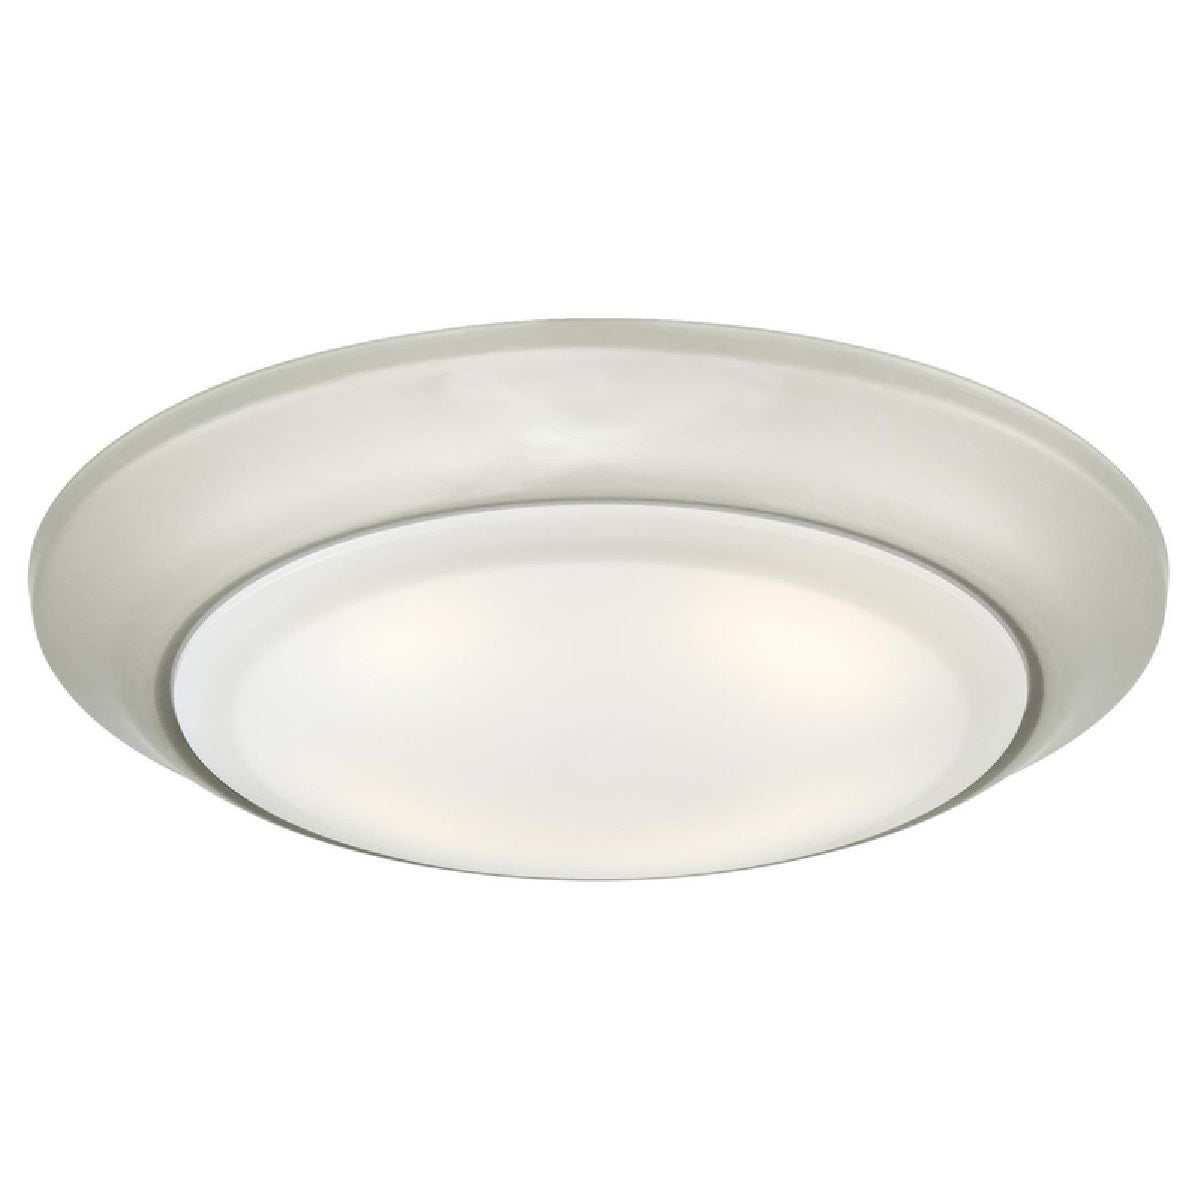 Westinghouse 63227 Dimmable Surface Mount Wet Location, Brushed Nickel Finish with Frosted Lens